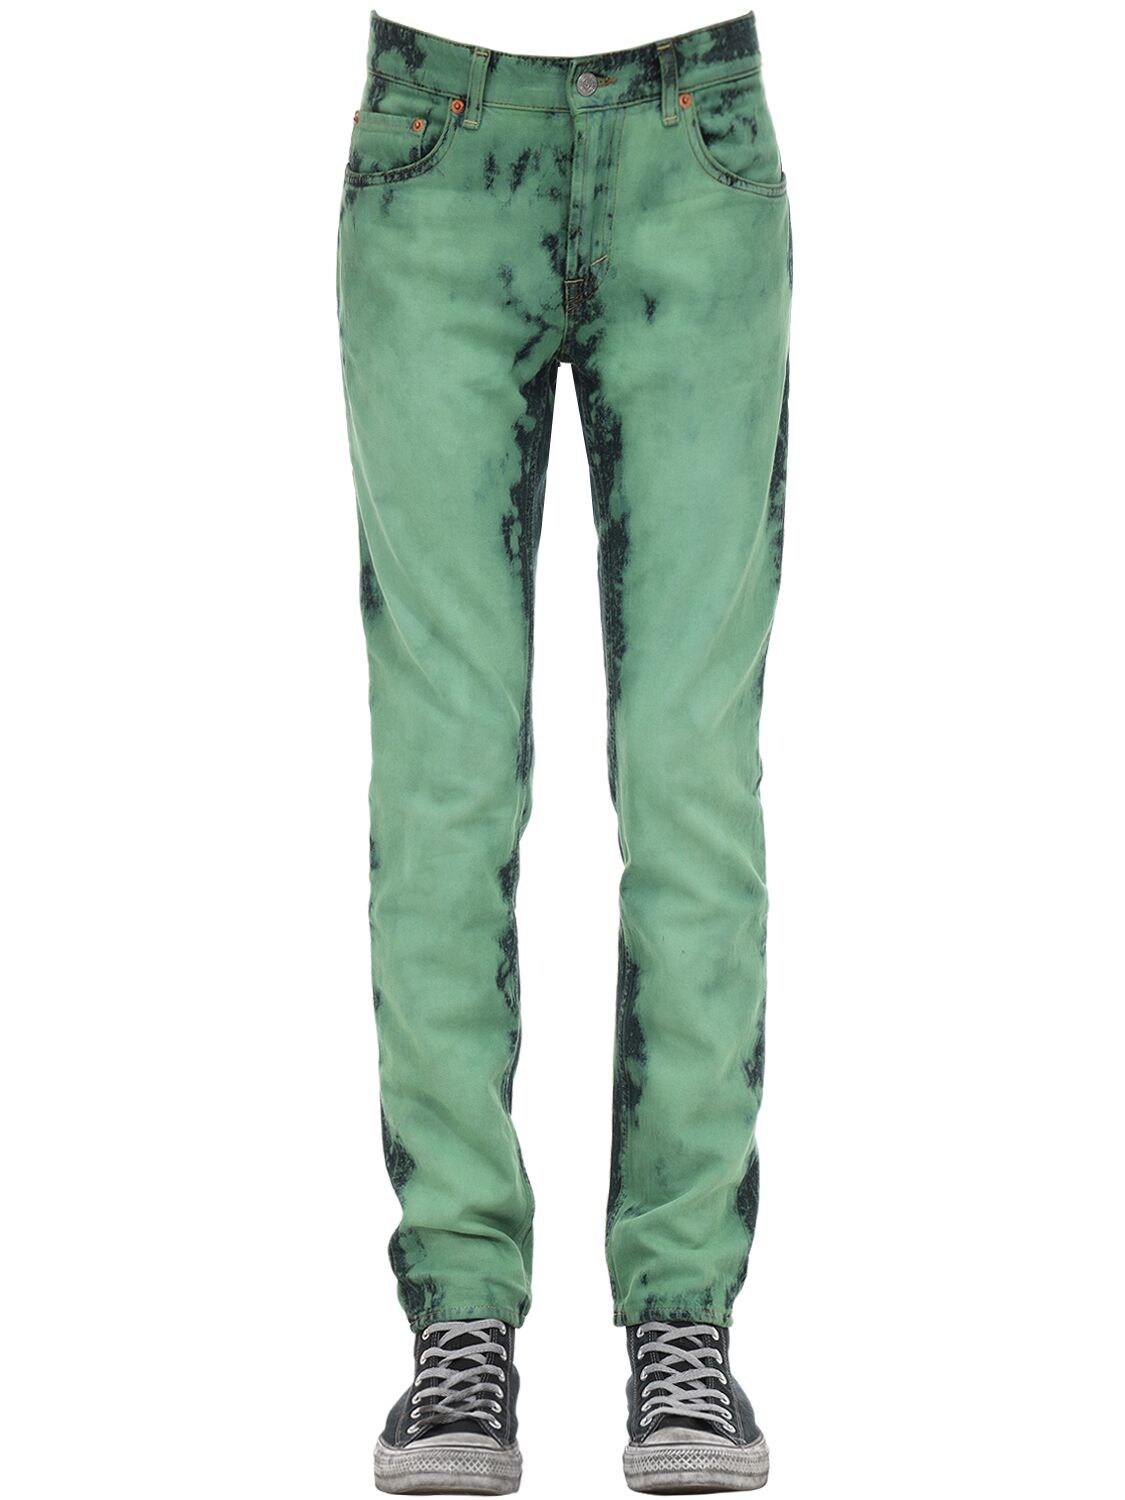 Department Five Skeith Cotton Pants In Green